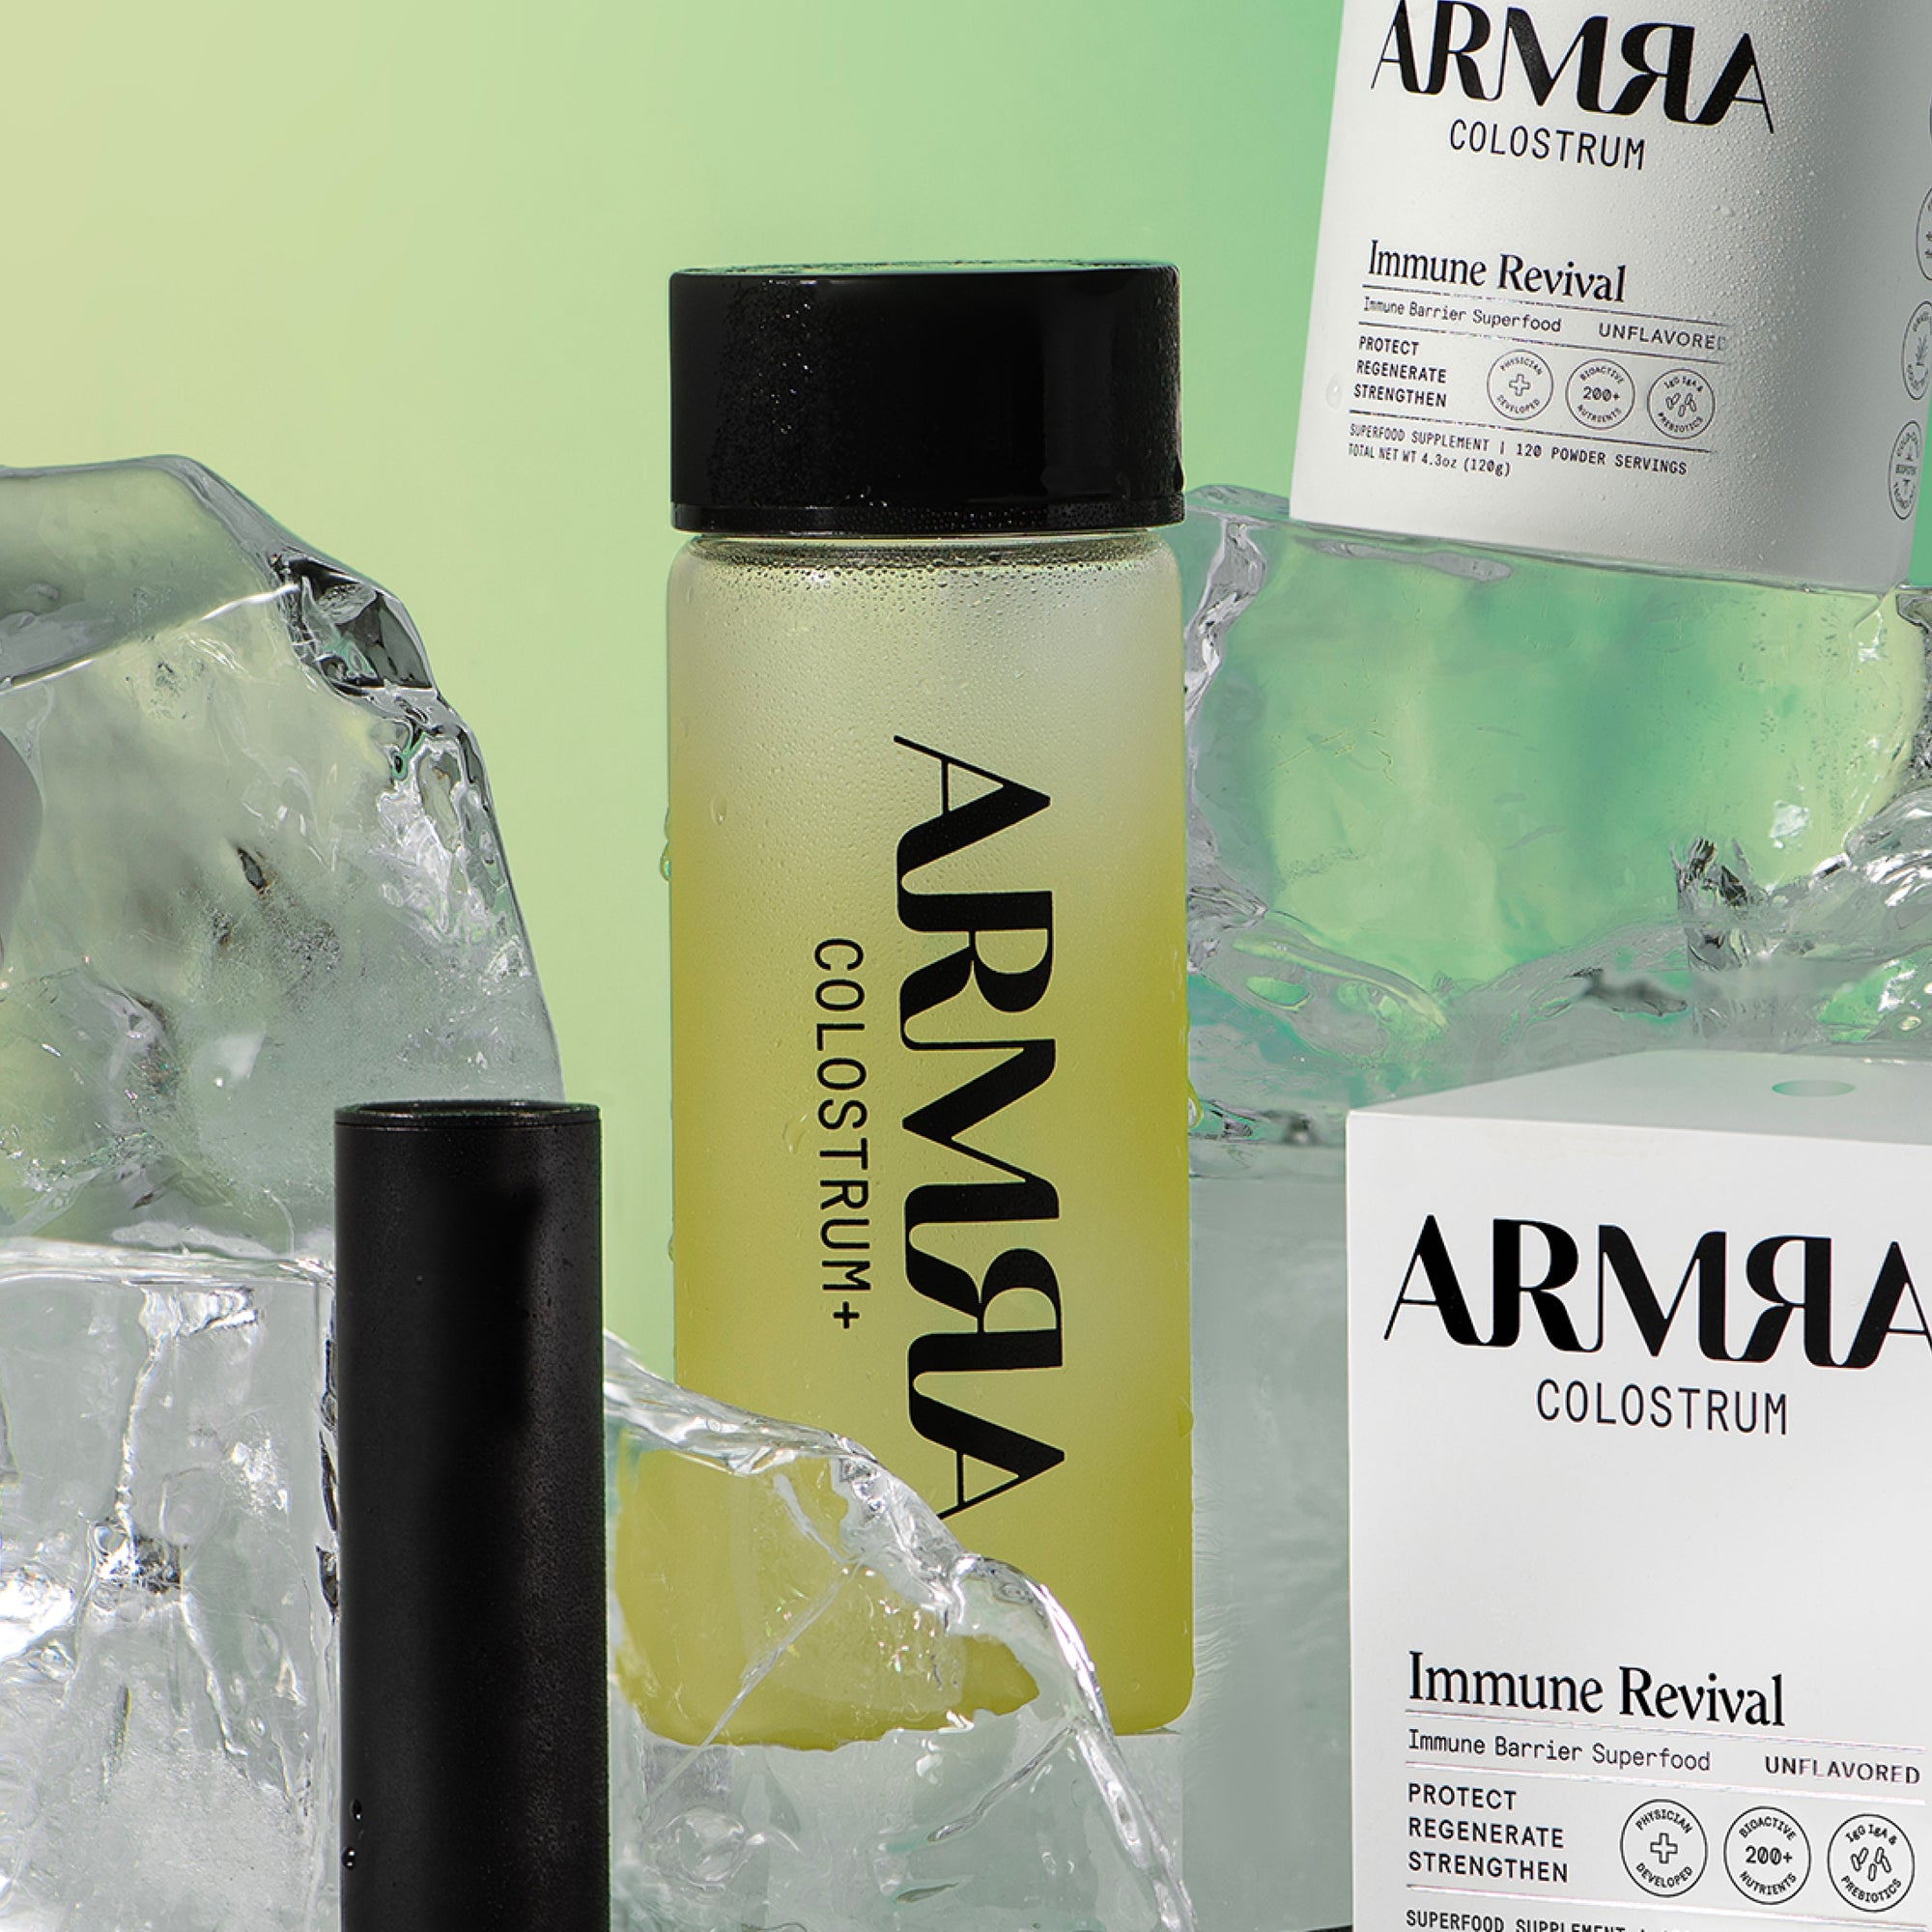 Glass water bottle with black lid and "ARMRA Colostrum+" logo surrounded by blocks of ice and boxes of ARMRA Colostrum Immune Revival